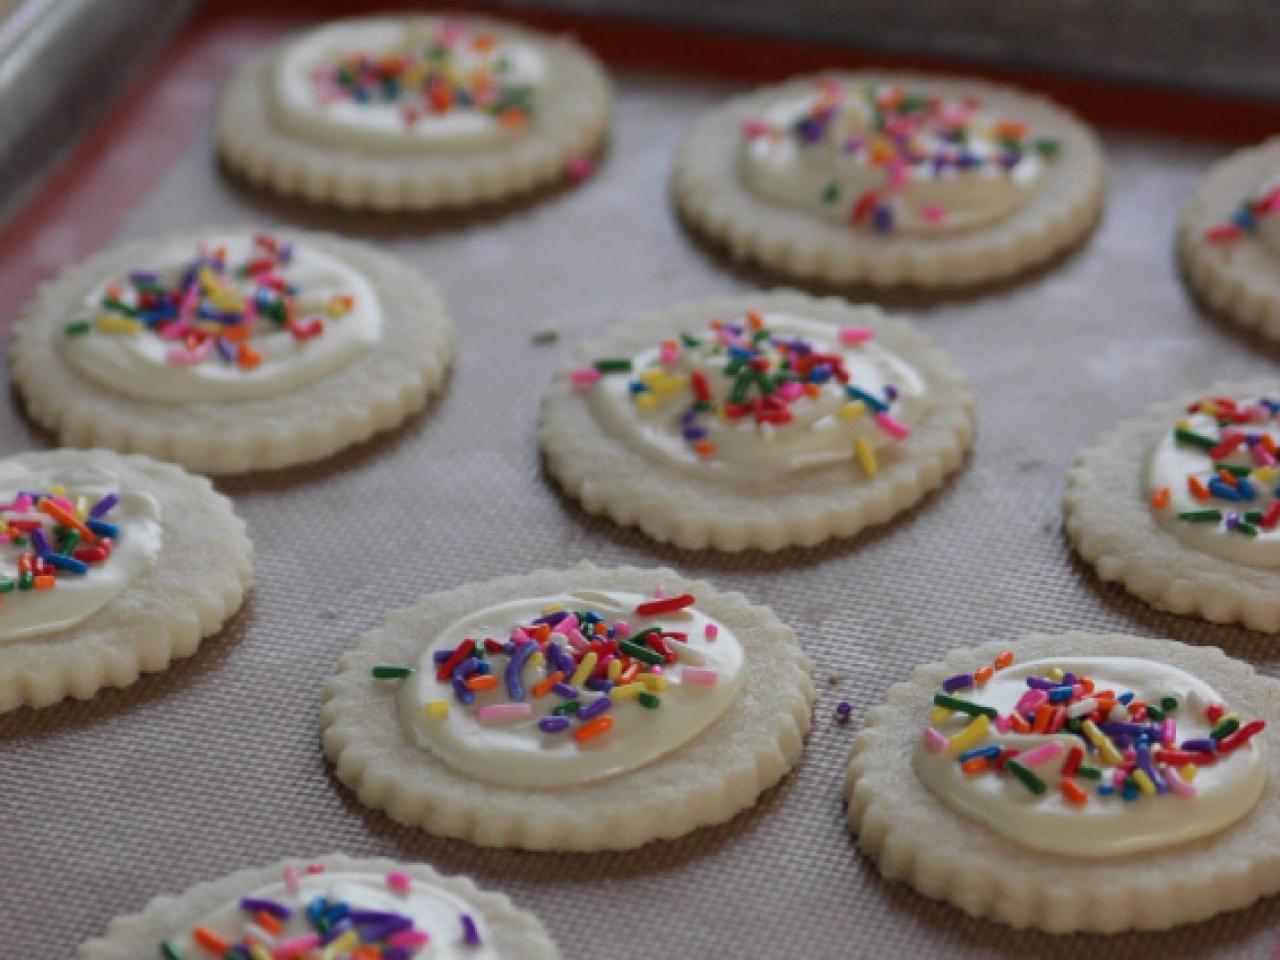 10 Christmas Cookies So Easy Kids Can Help Make Them | FN Dish - Behind-the-Scenes, Food Trends ...